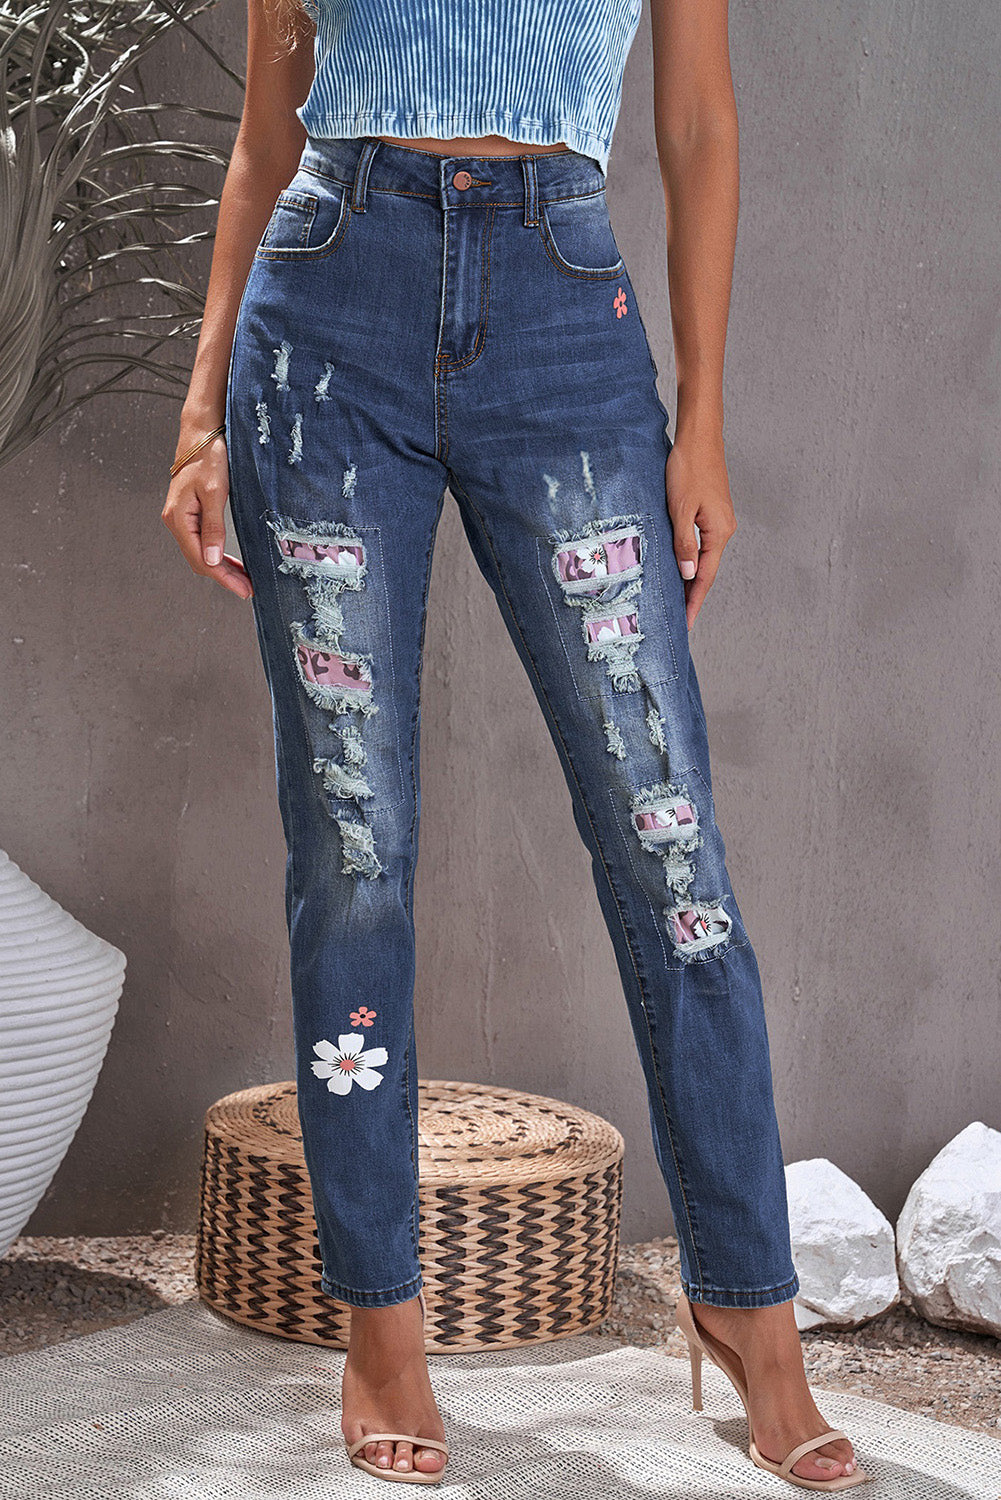 Distressed Buttoned Jeans with Pockets Bottom wear